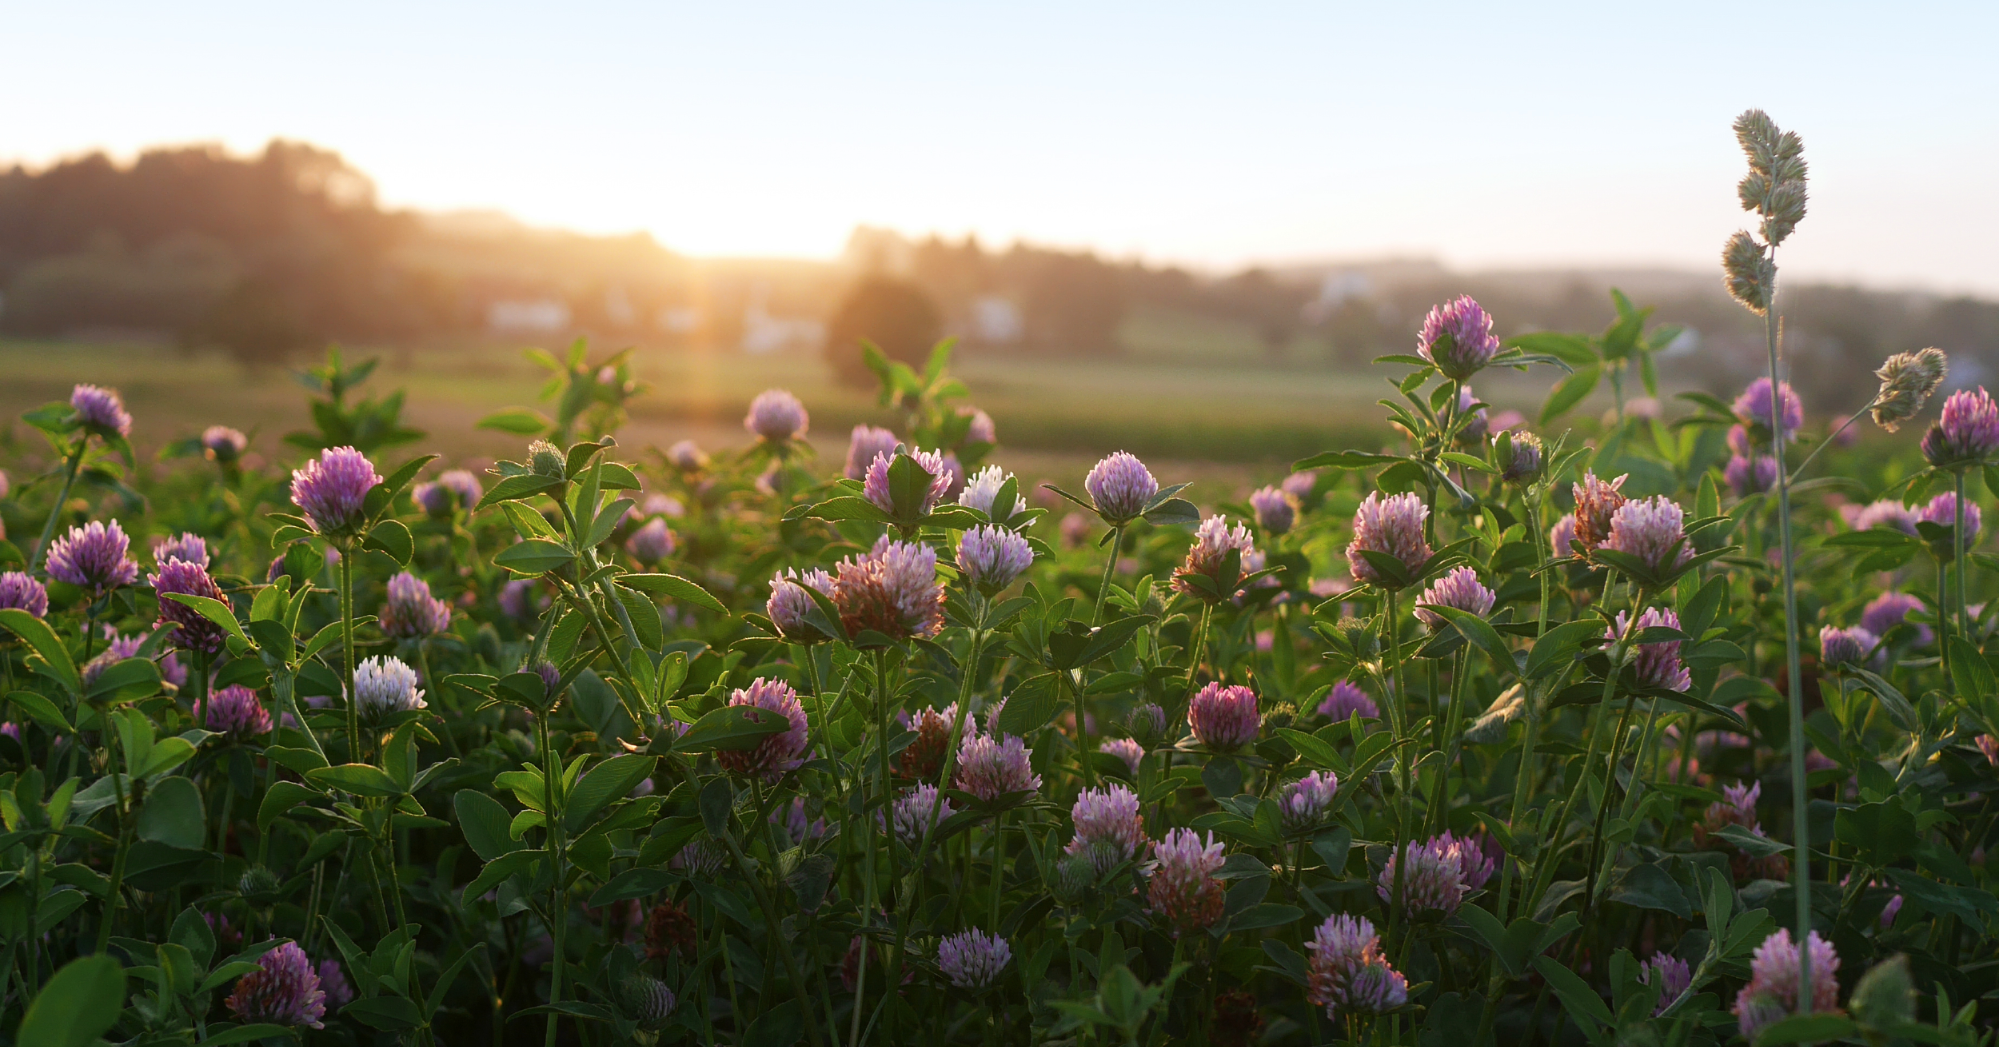 field of pink clover cover crops